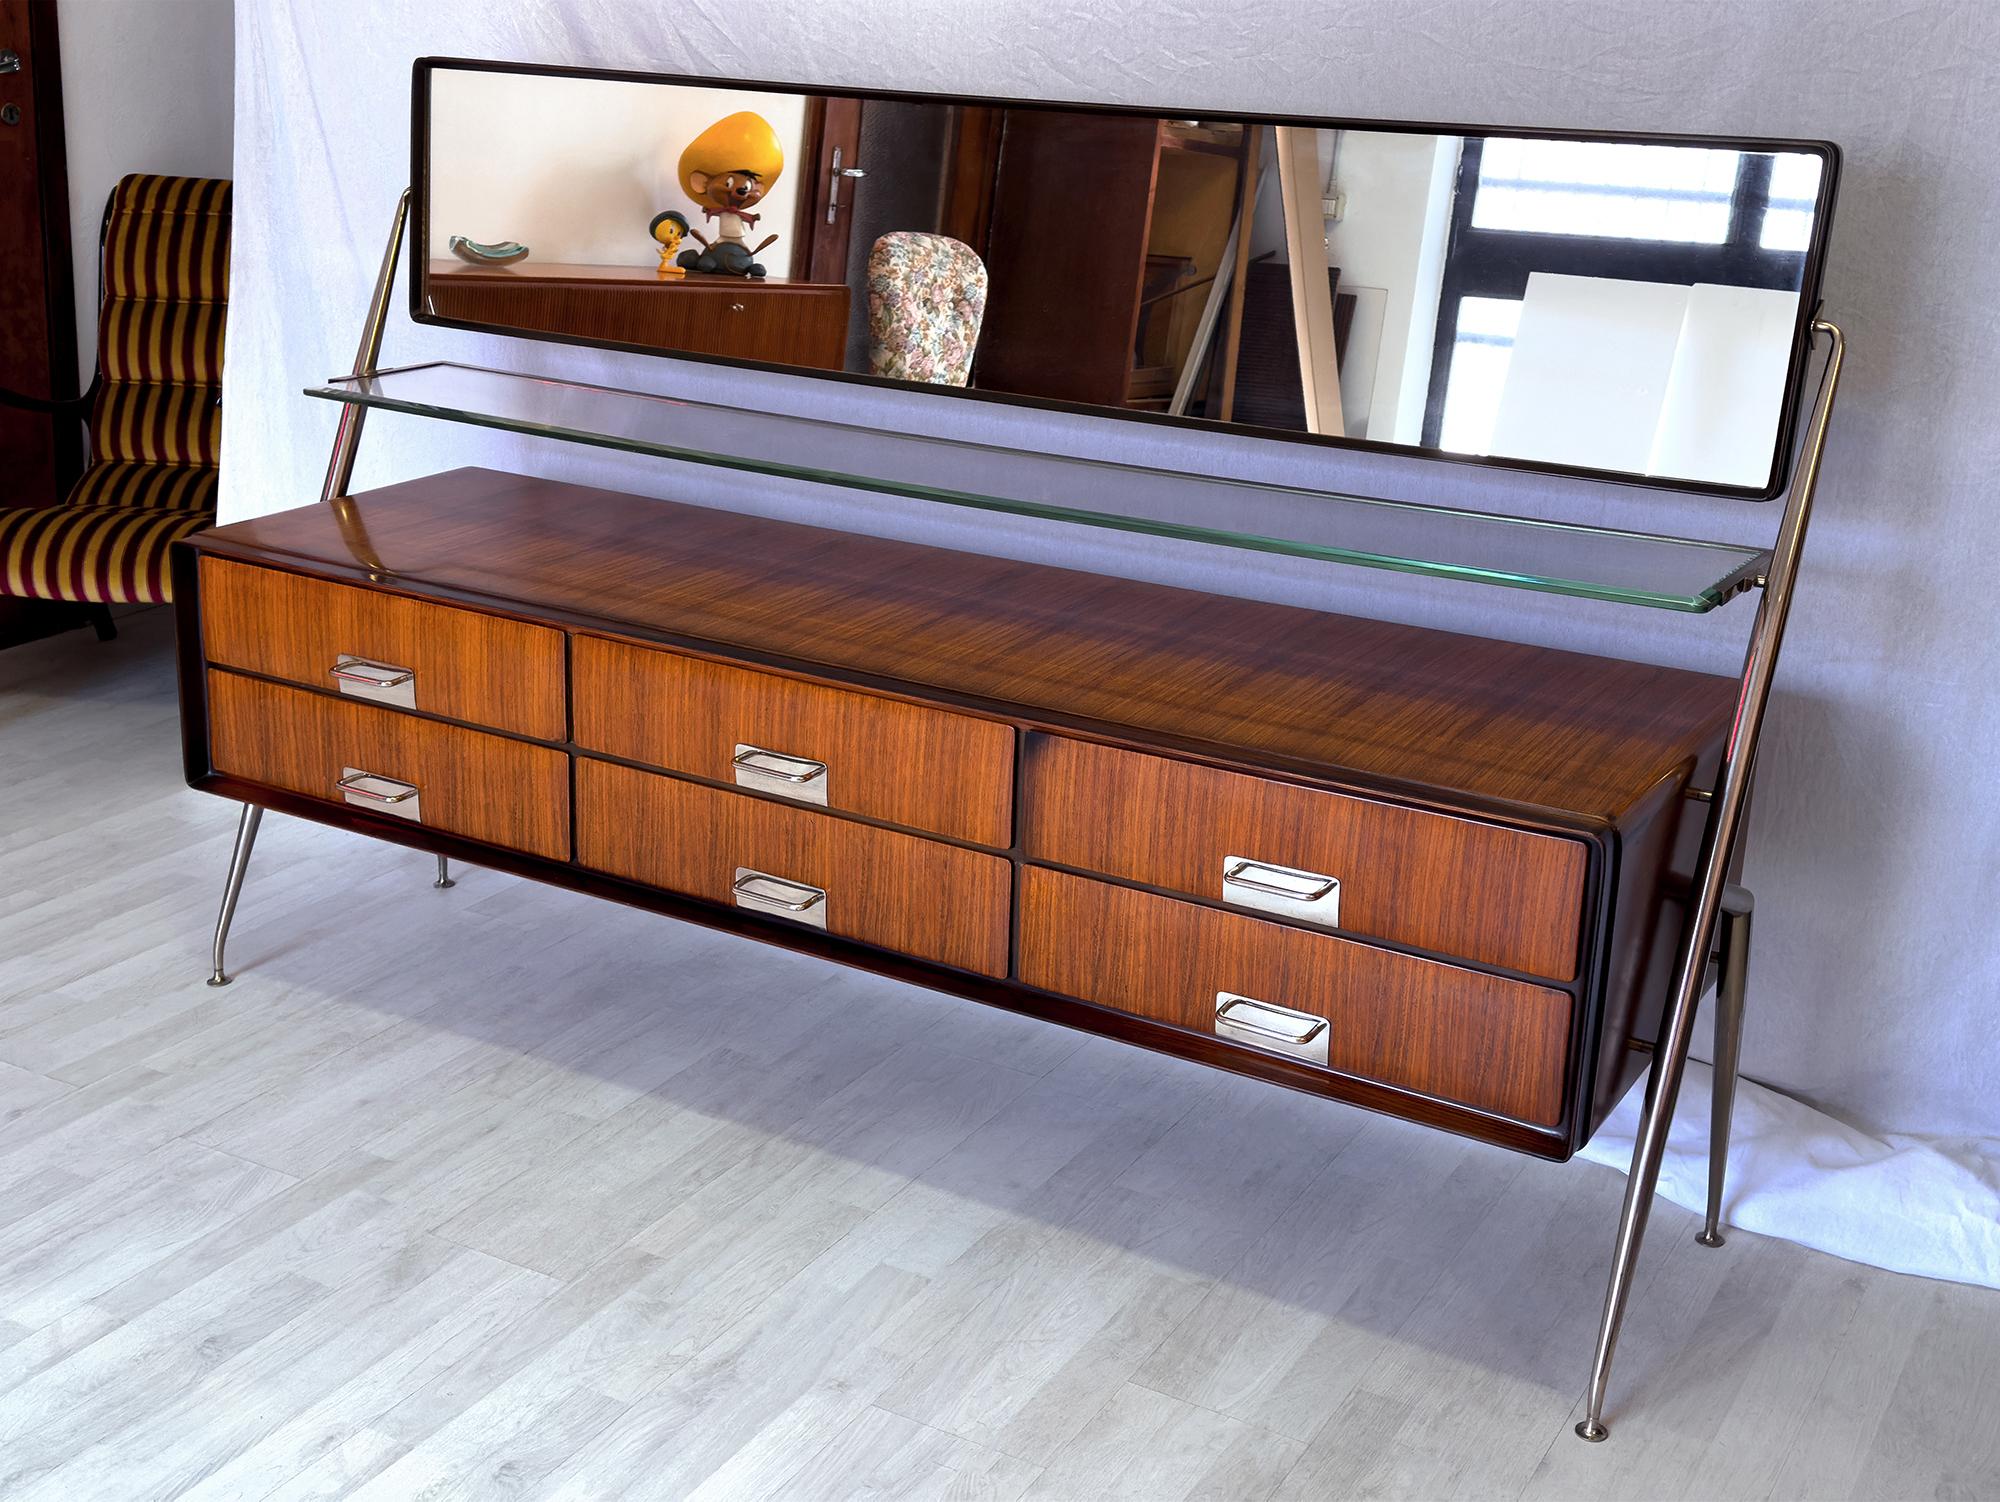 Stunning Italian sideboard and/or dresser, very well designed by Silvio Cavatorta in 1950s.
The cabinet is made of gorgeous teak wood and equipped with six drawers finished with brass chromed details.
It’s surmounted by a fixed shelf in thick art